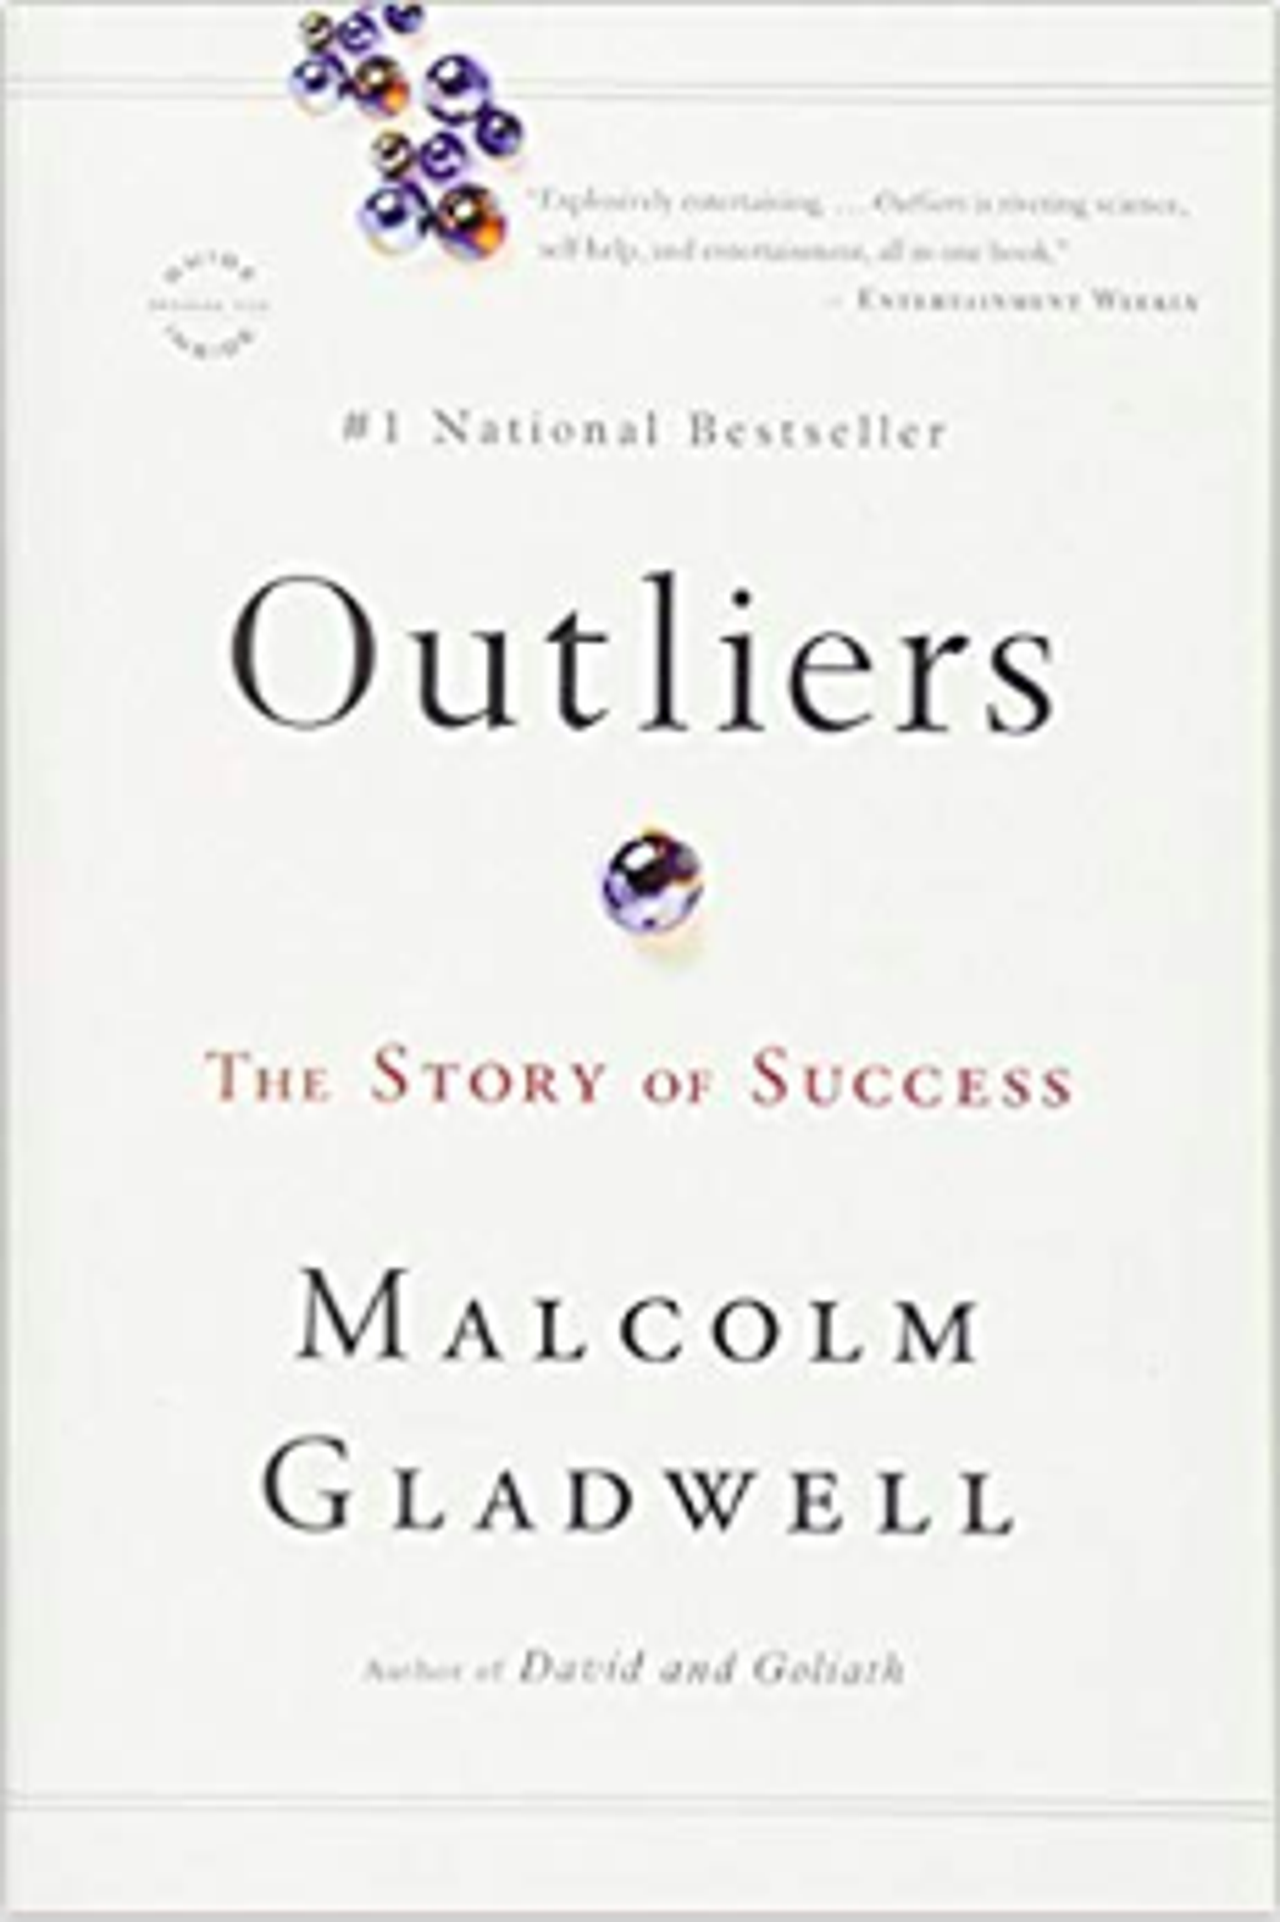 Outliers: The Story of Success by Malcom Gladwell